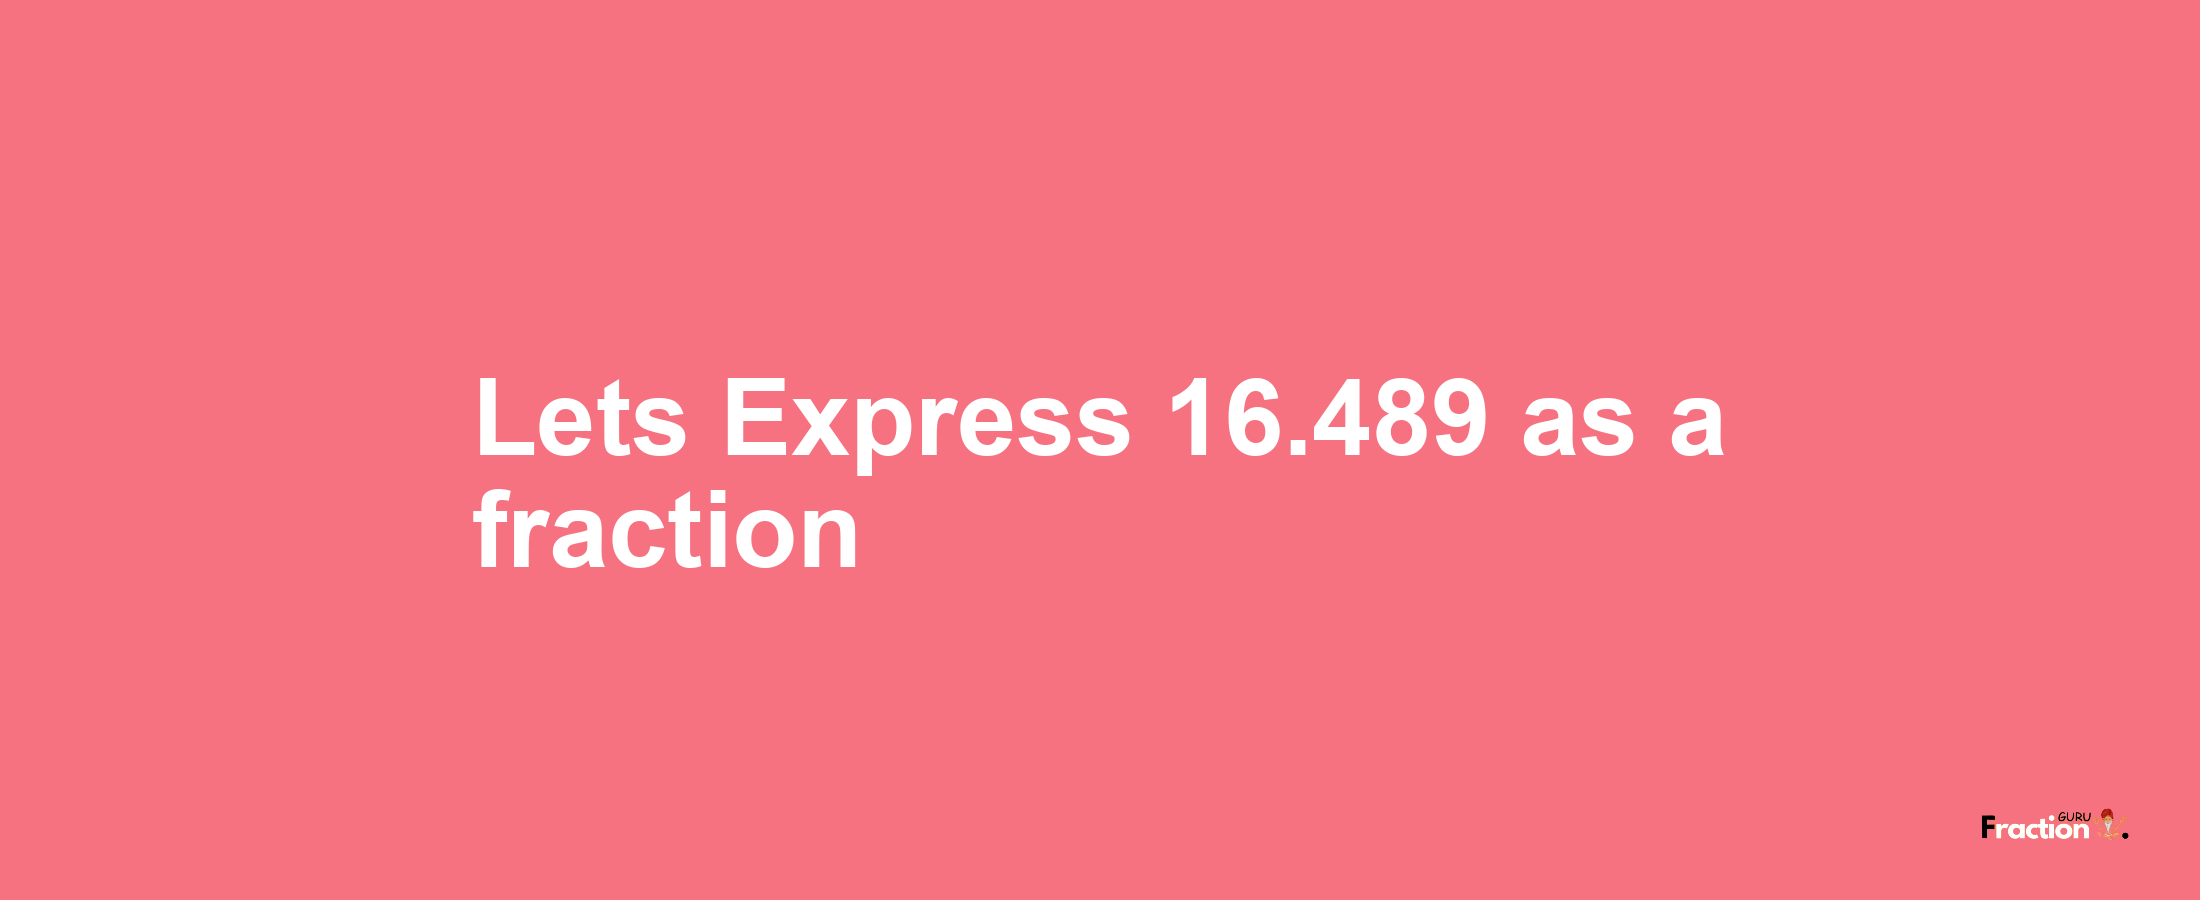 Lets Express 16.489 as afraction